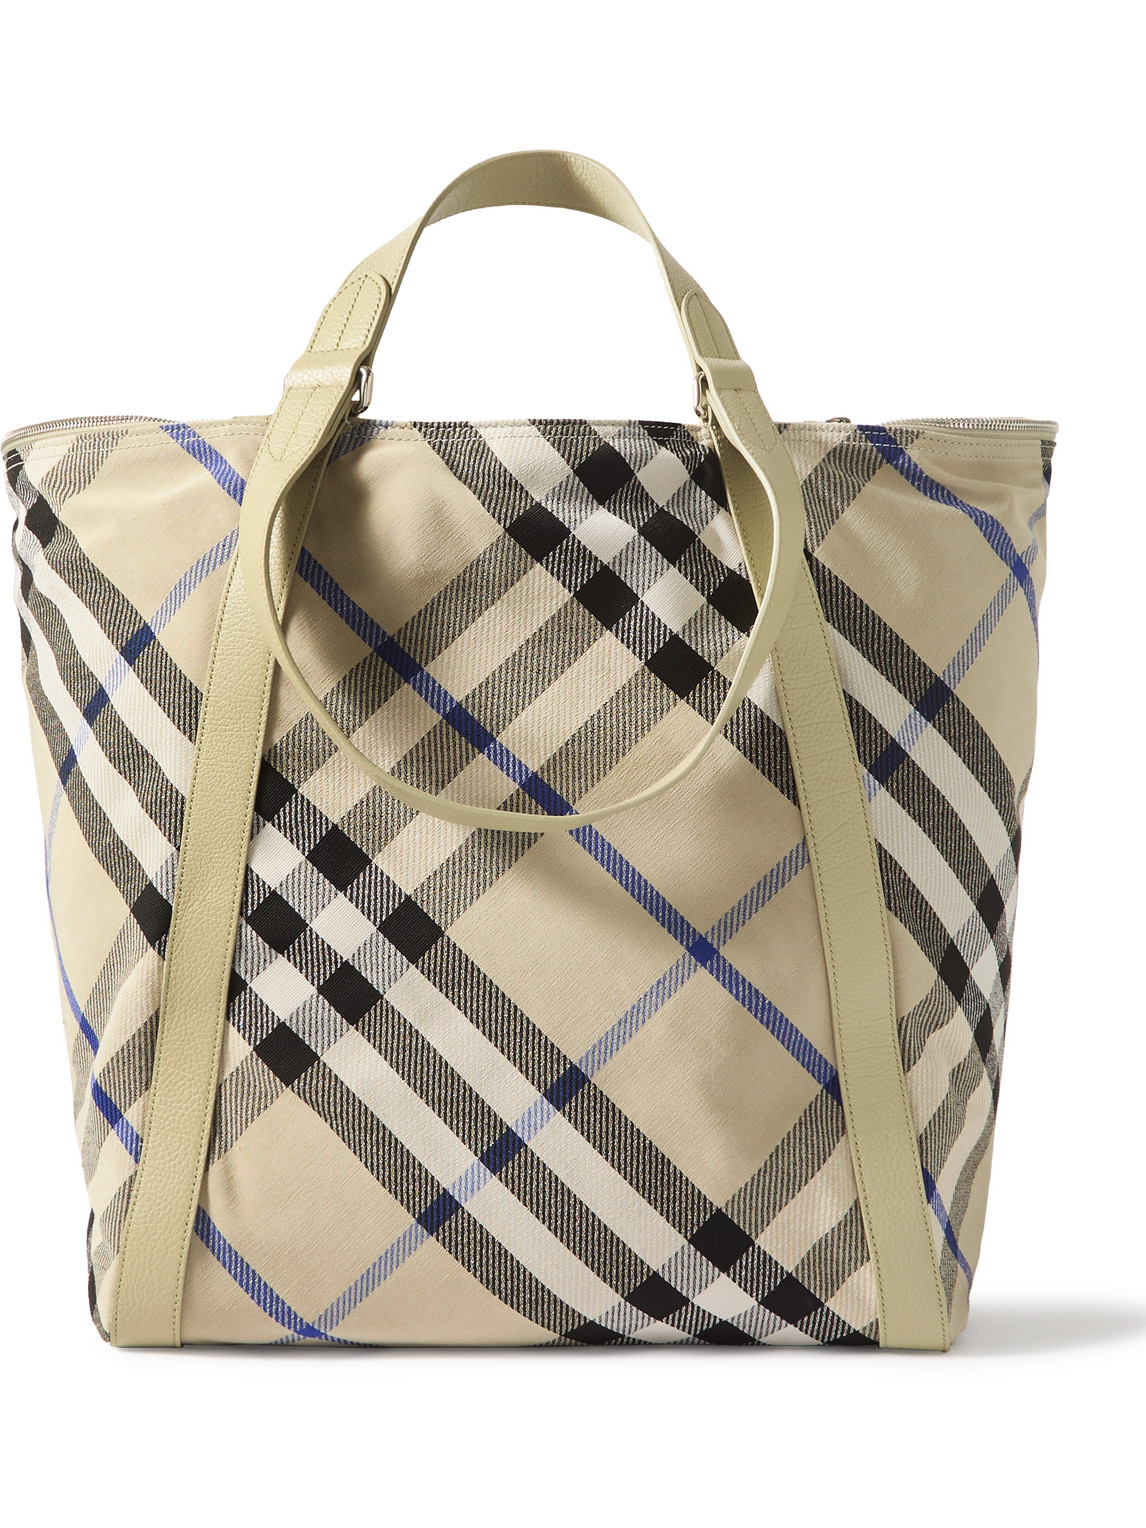 Burberry Large Leather-trimmed Checked Jacquard Tote Bag In Neutral